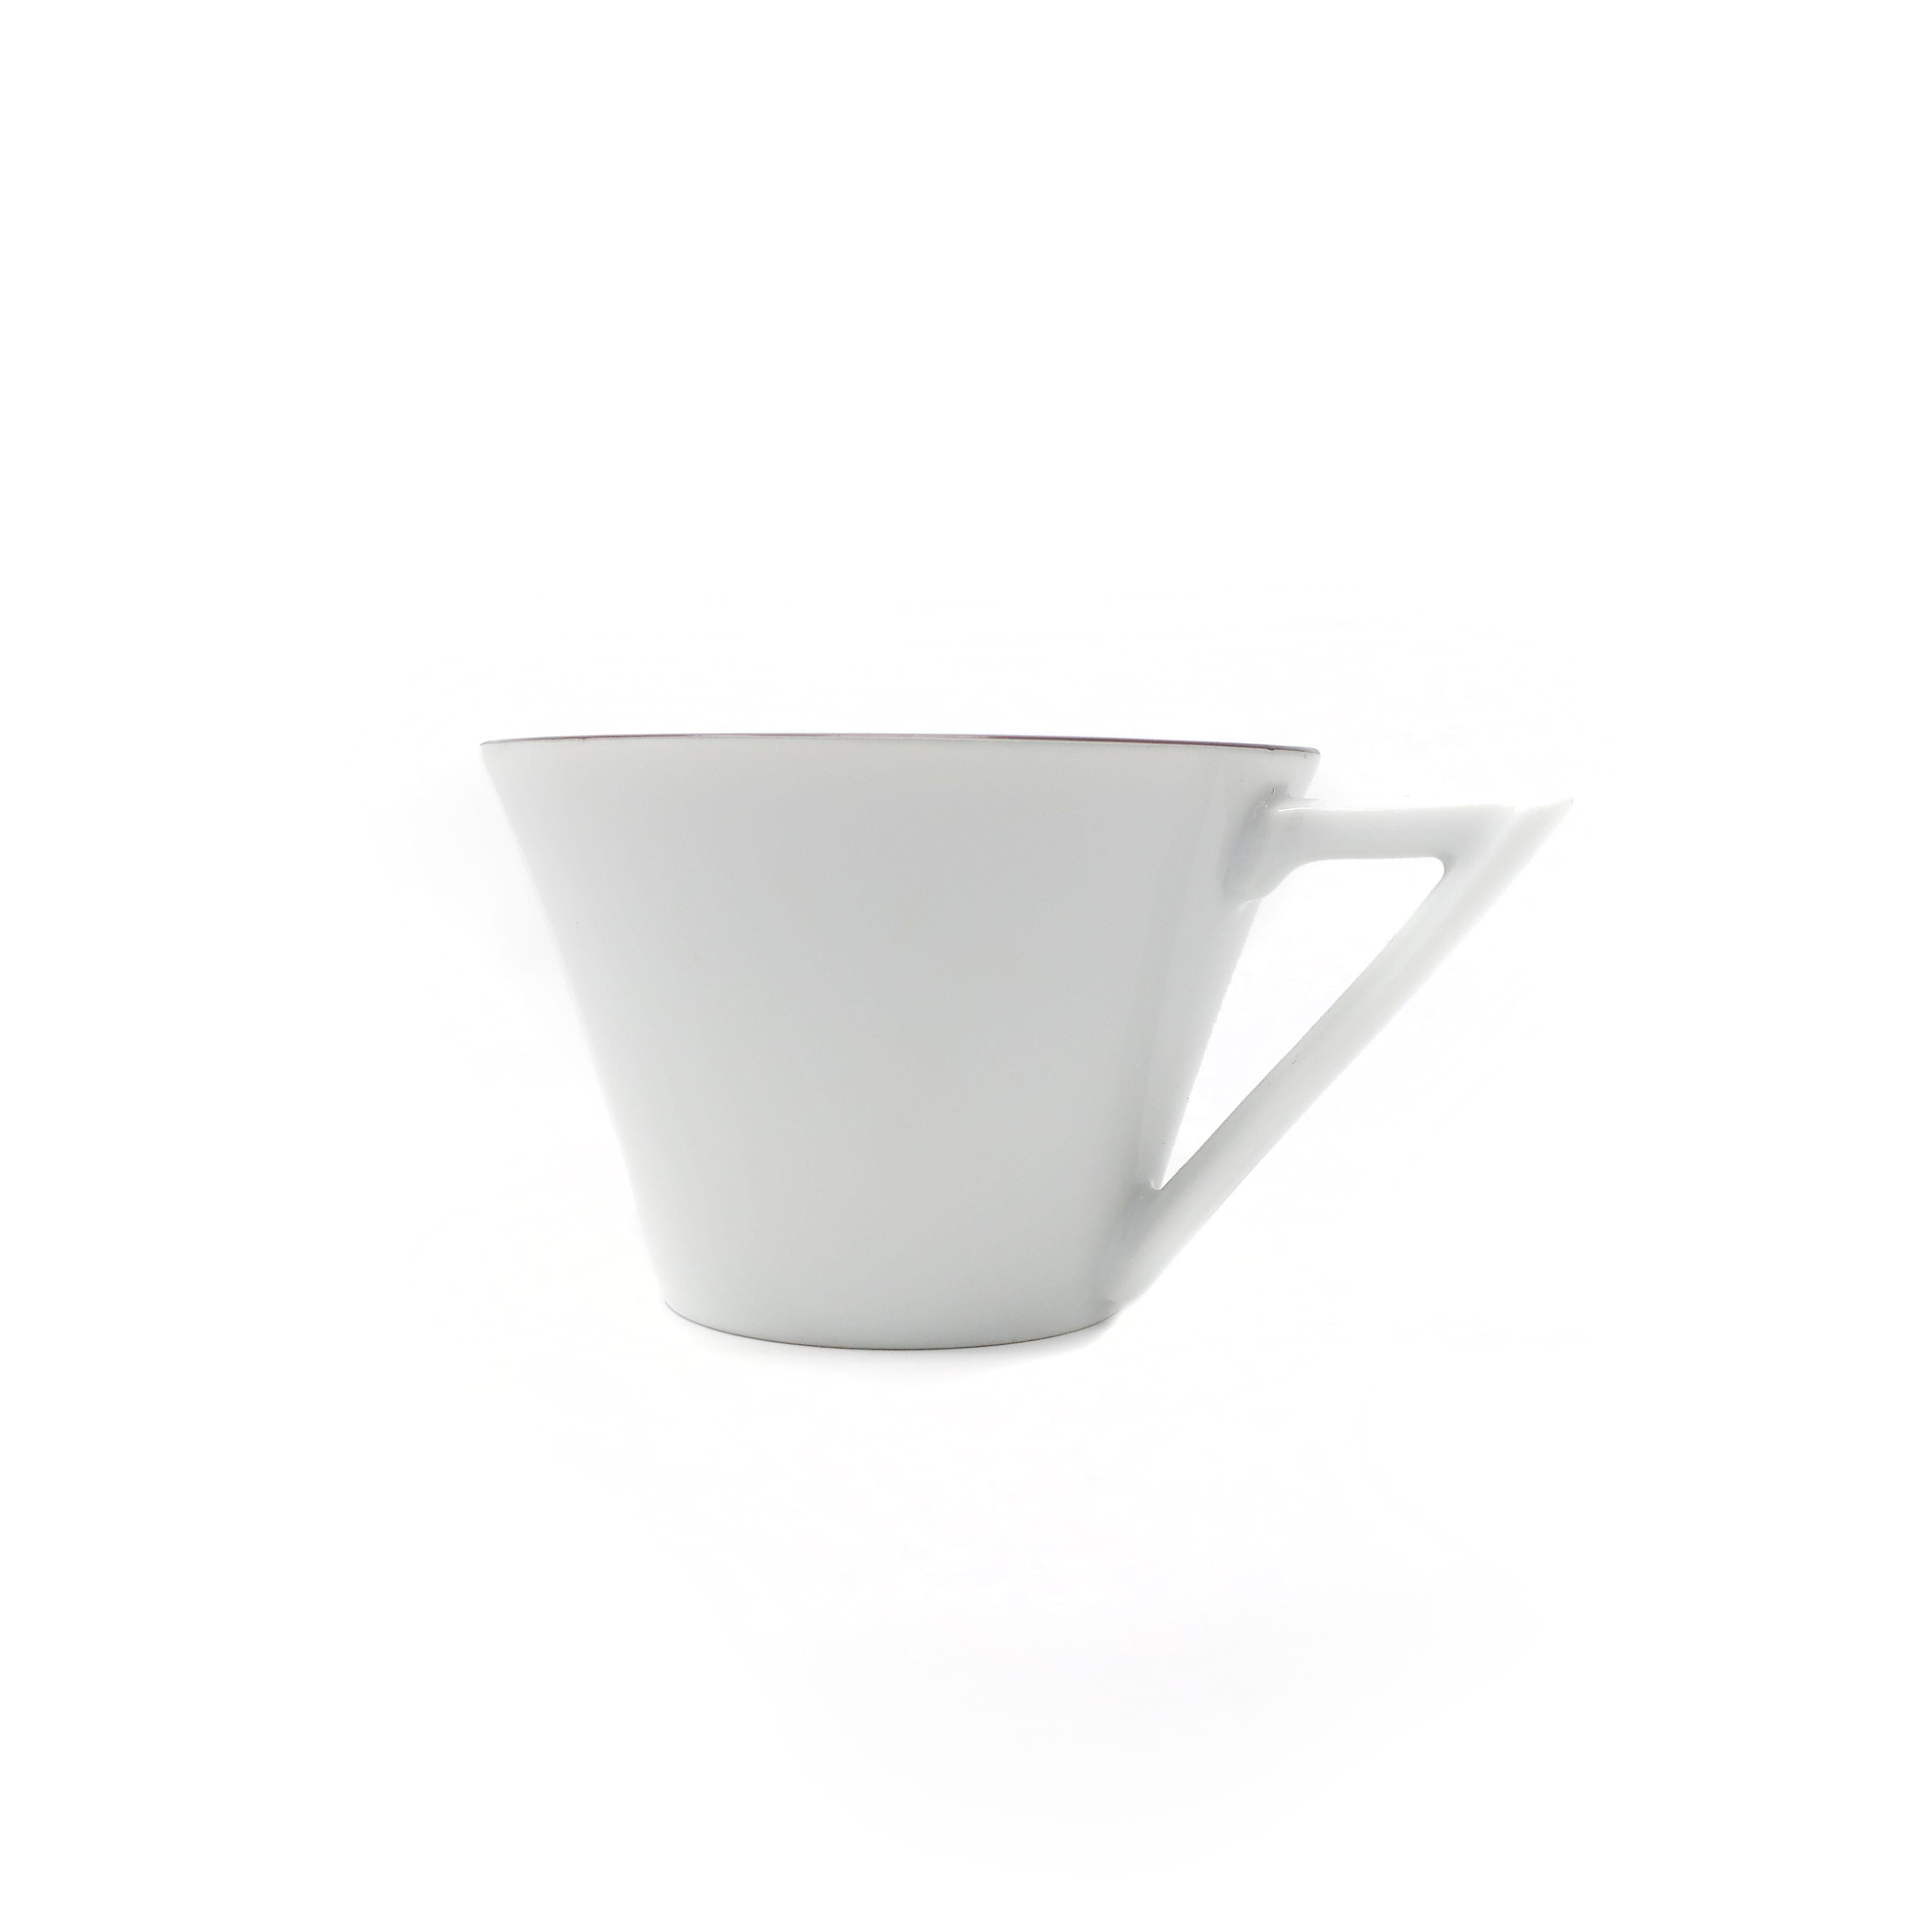 Andree Putman for Sasaki Cups and Saucers 3